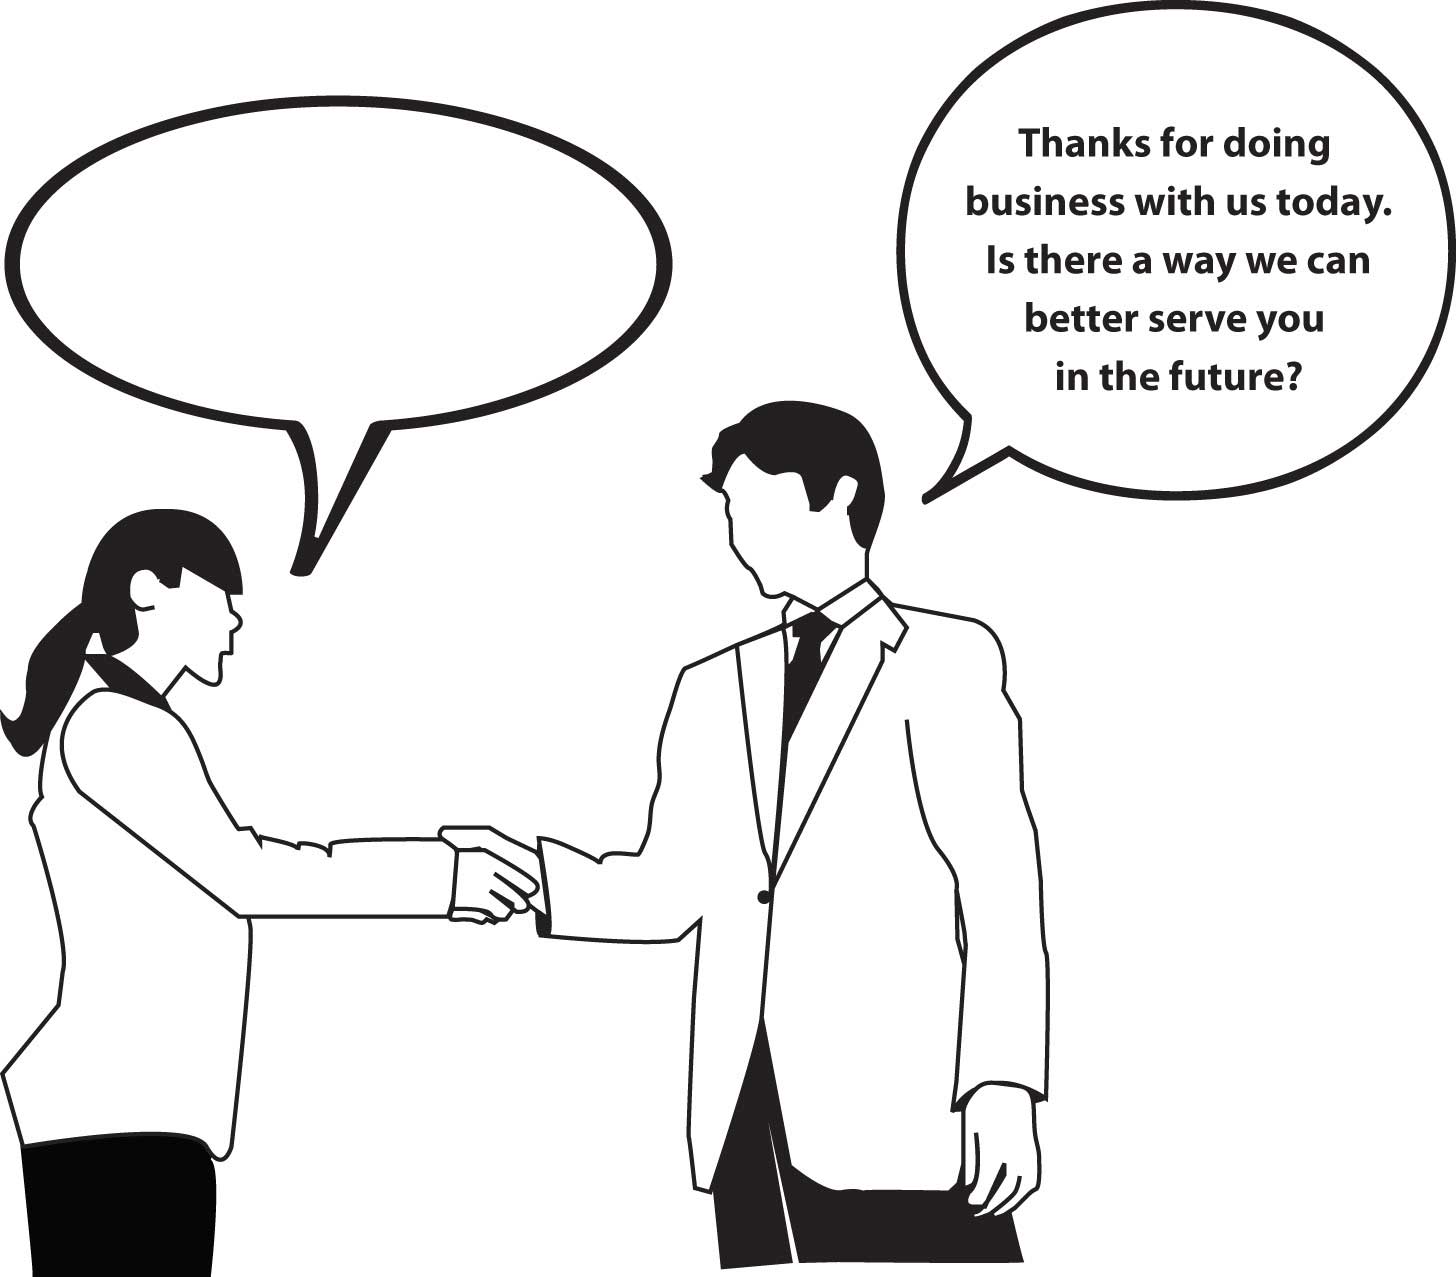 A cartoon of a man shaking a woman's hand saying